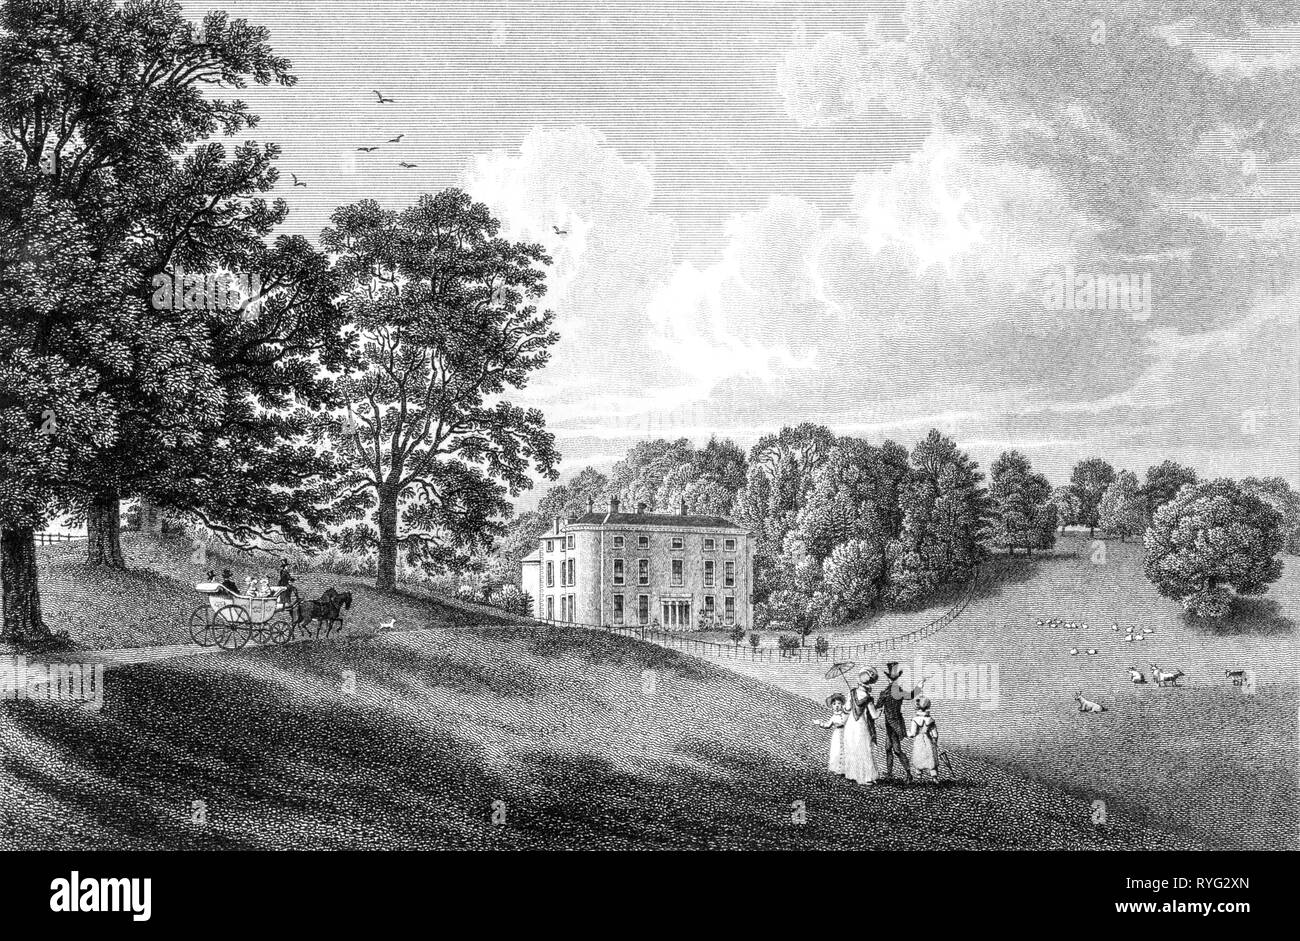 An engraving of Cerney House the Seat of William Croome, North Cerney, Gloucestershire UK scanned at high resolution from a book published in 1825. Stock Photo